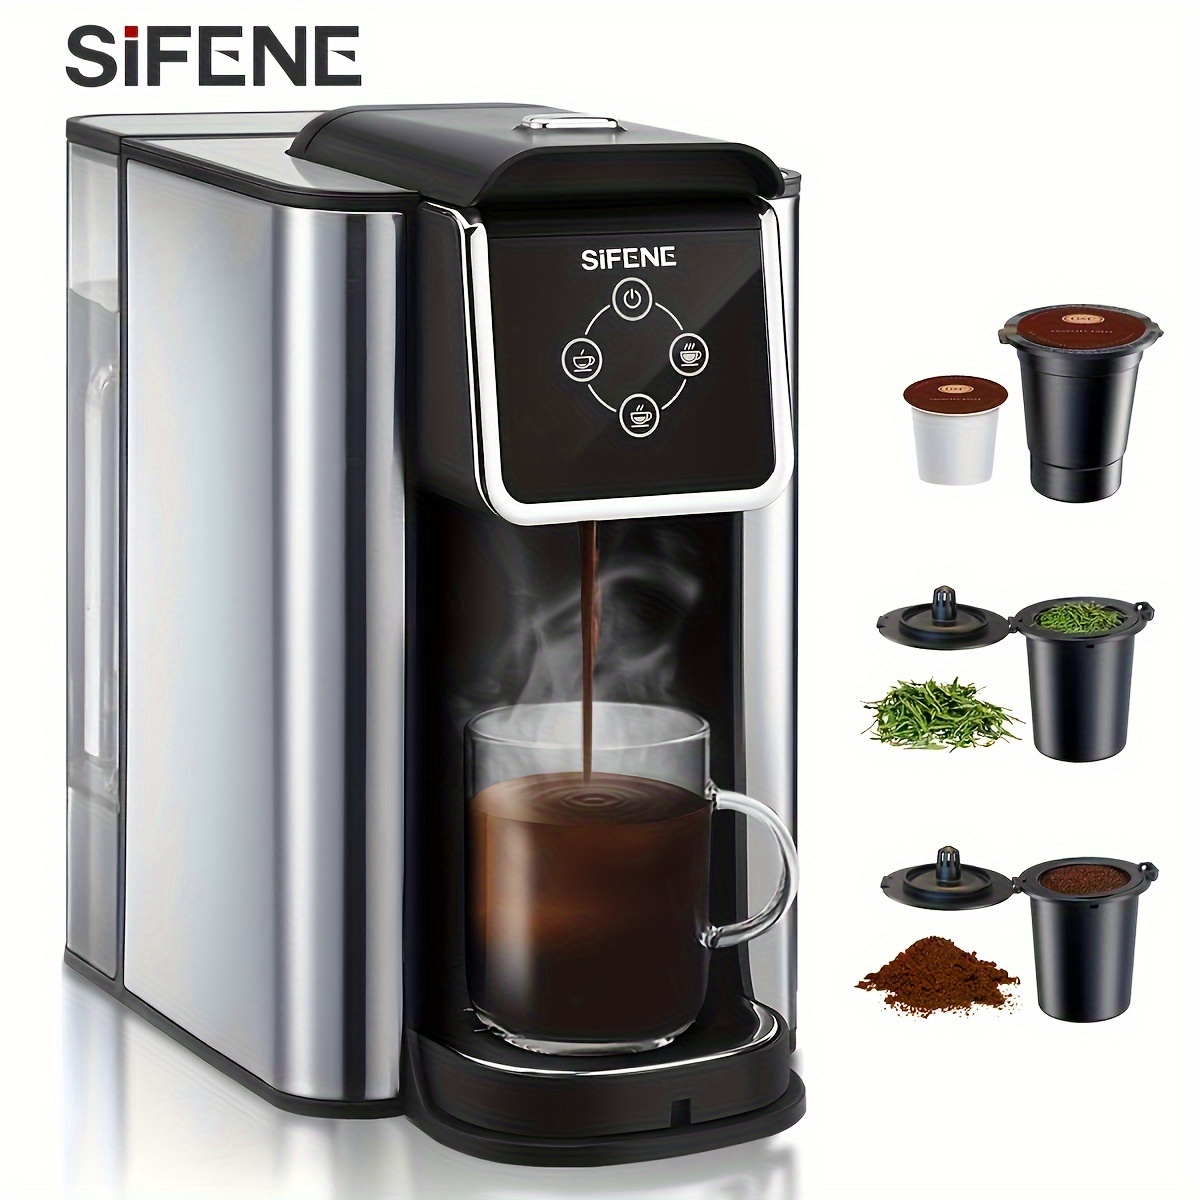 

Sifene 3-in-1 Single Serve Coffee Maker For K-pods, Ground Coffee, And Loose Leaf Tea, Custom Temperature And Strength Control, Quick Brew With Large 50 Oz Reservoir